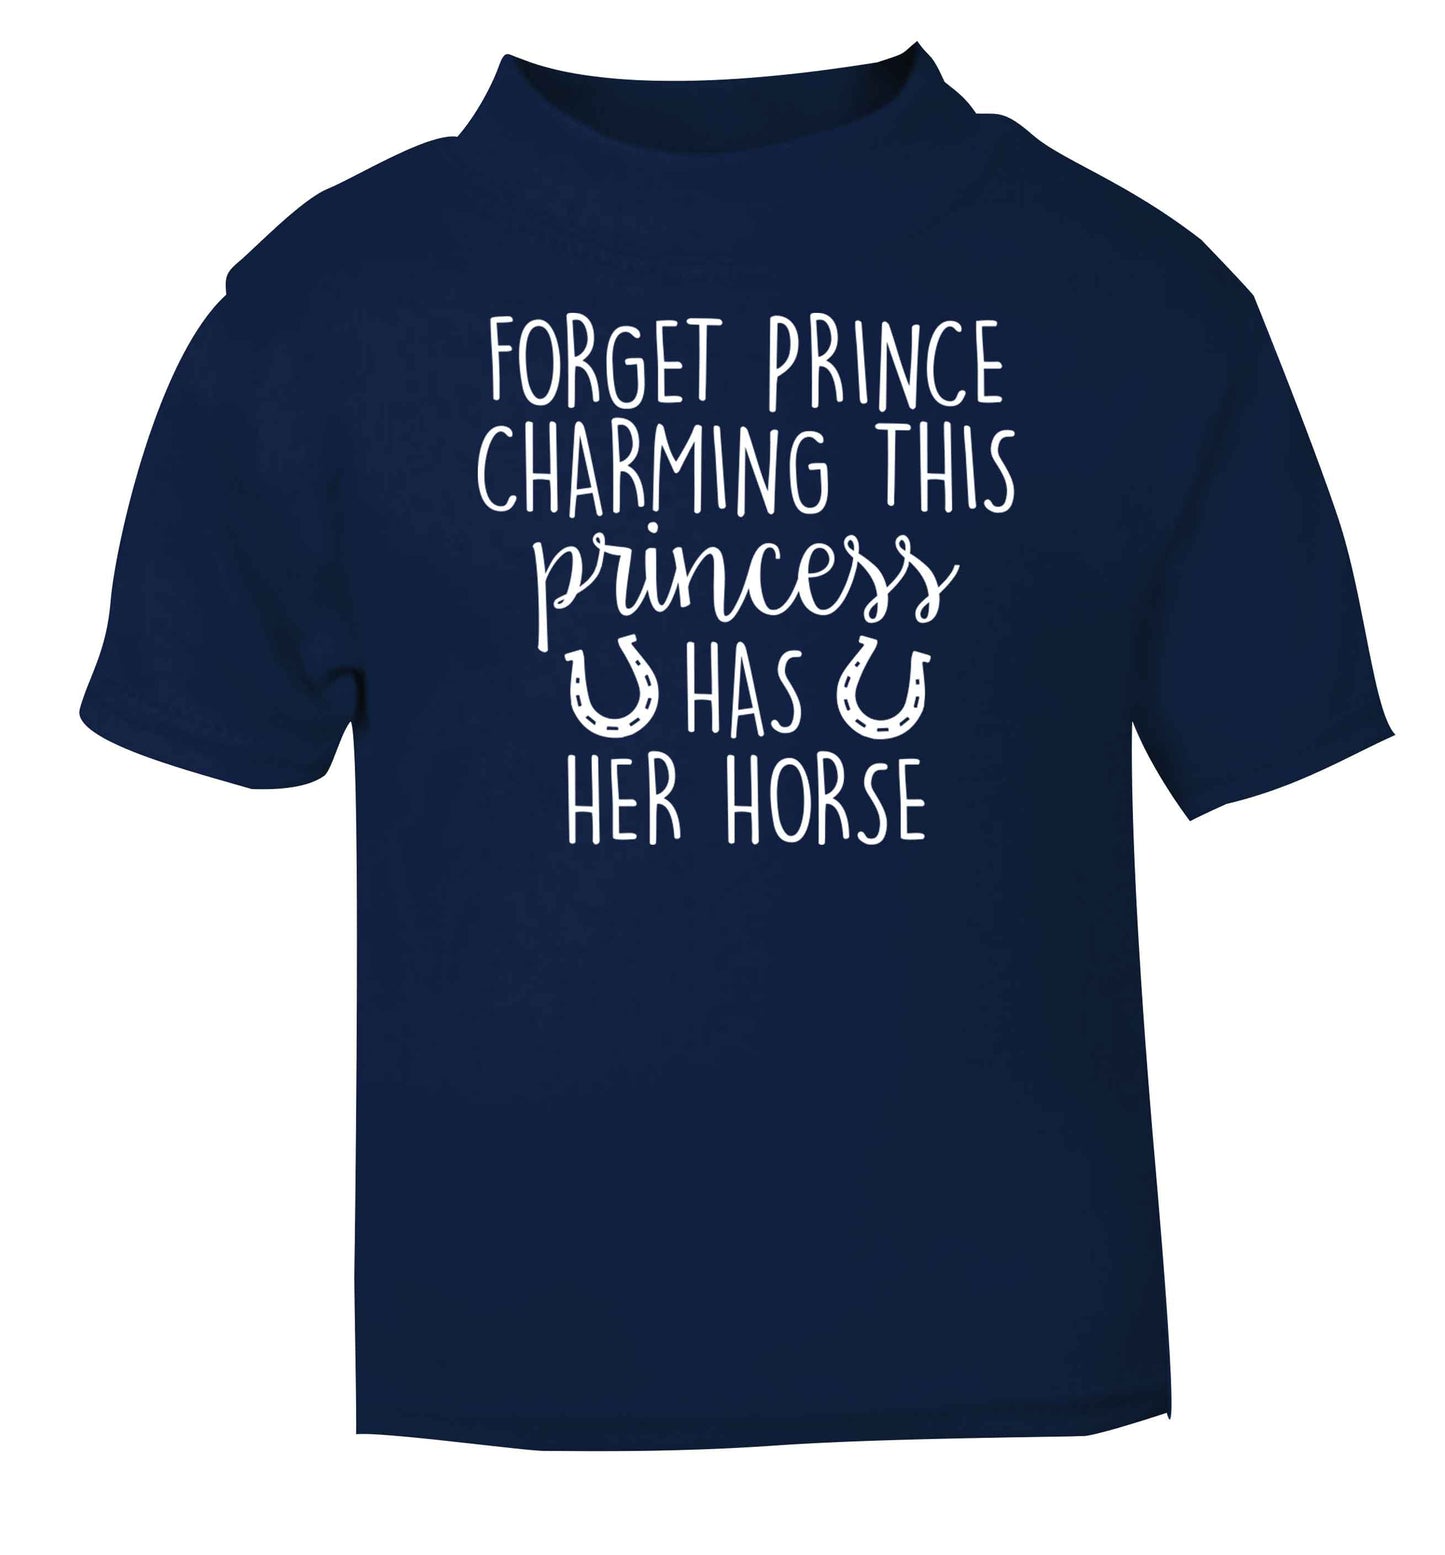 Forget prince charming this princess has her horse navy baby toddler Tshirt 2 Years